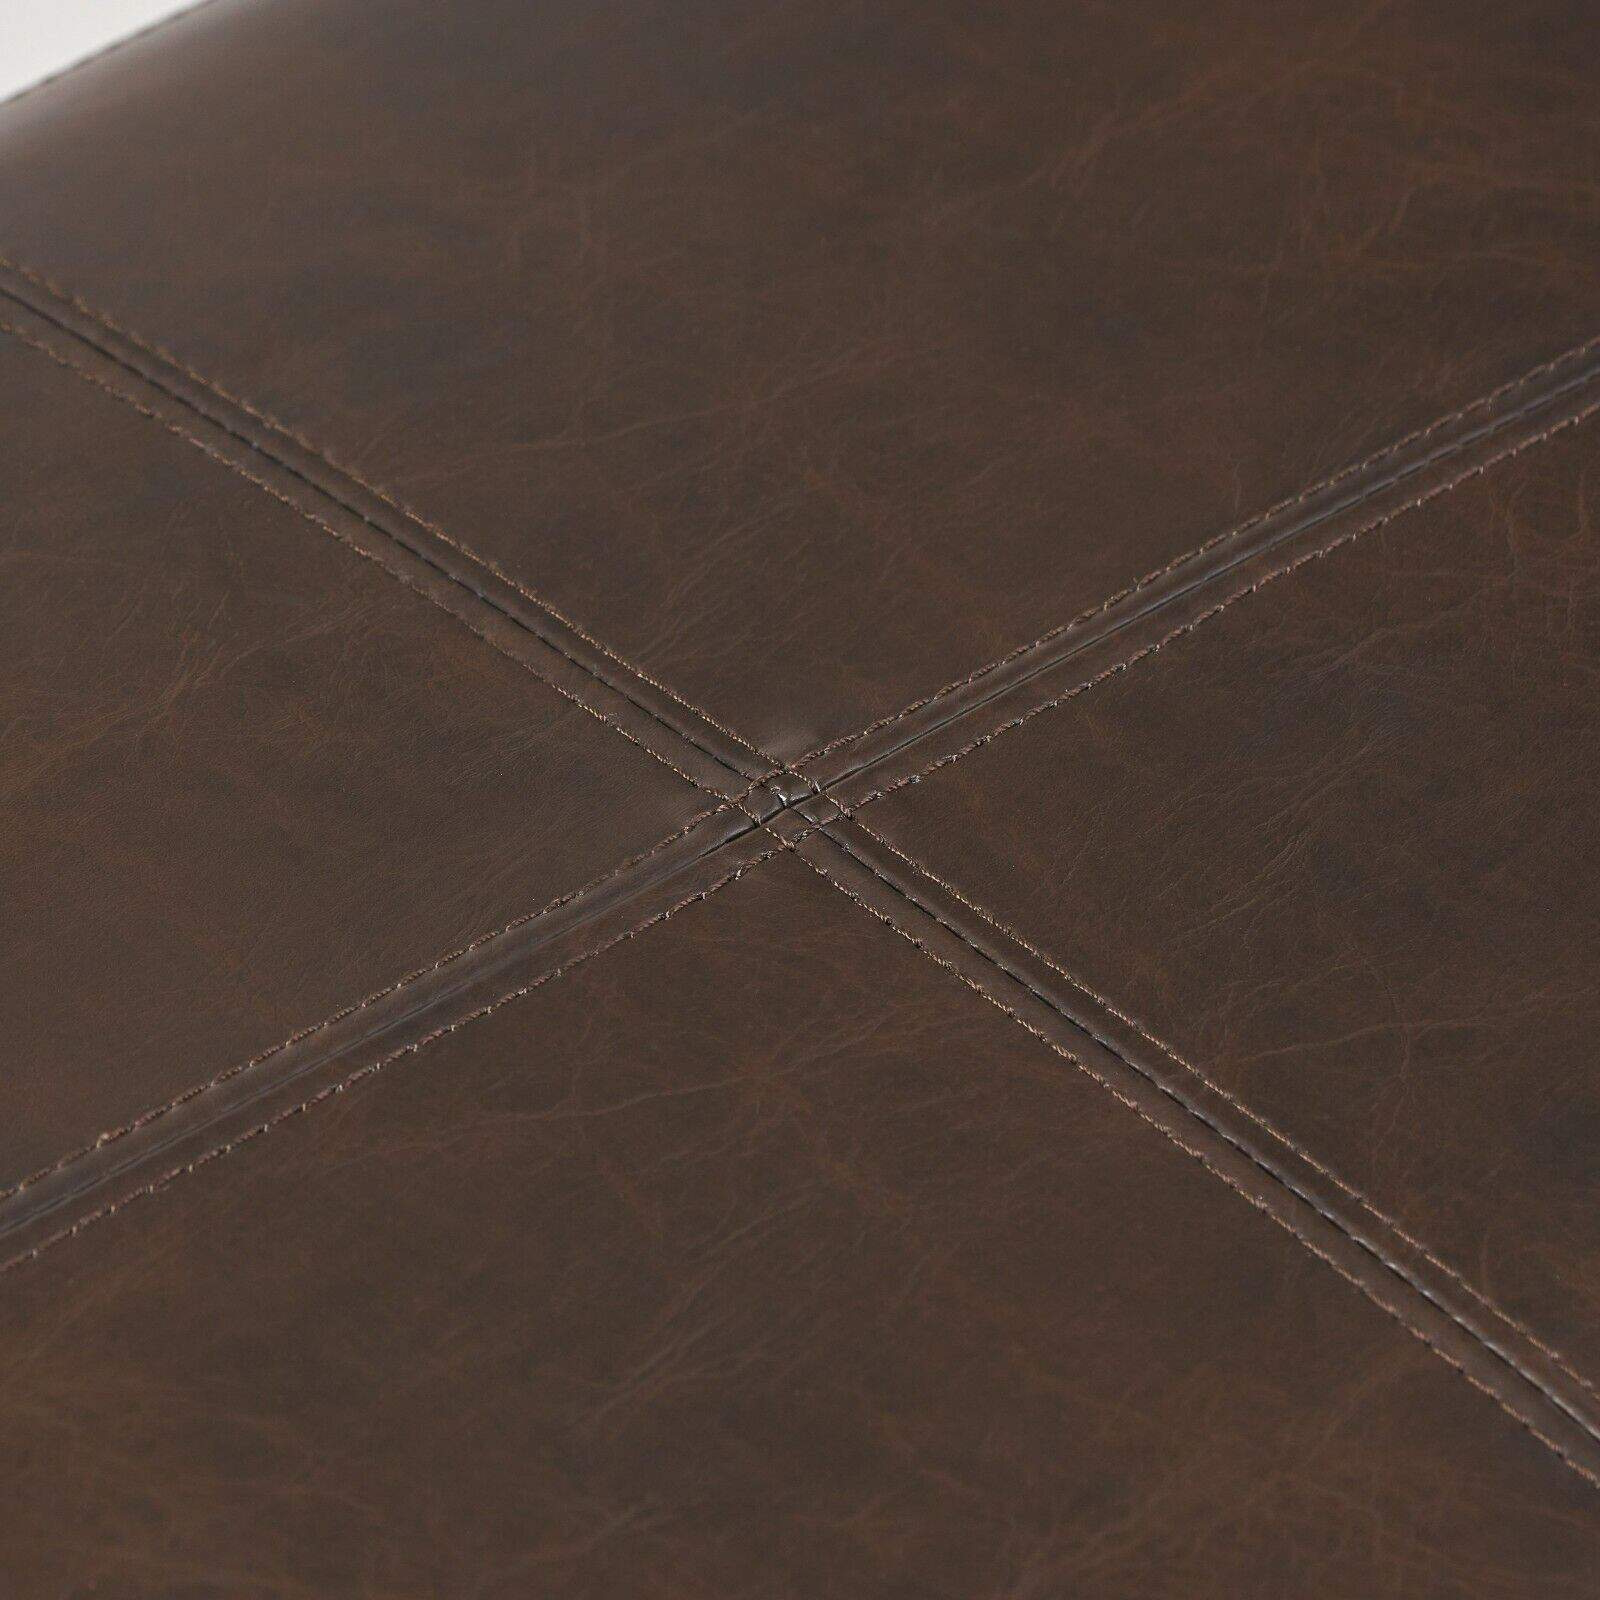 A close up view of a brown leather ottoman.